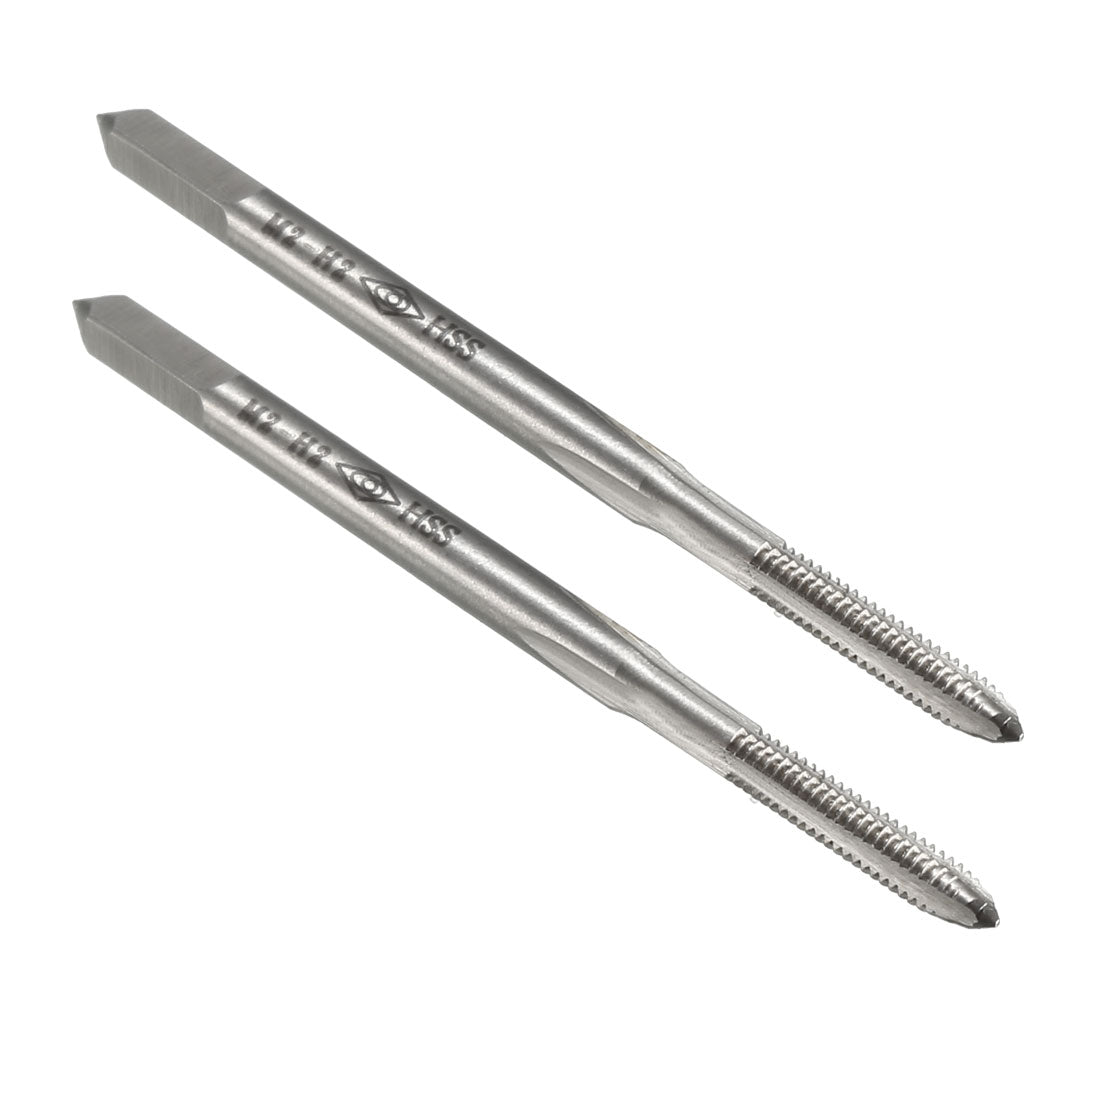 uxcell Uxcell Metric Machine Taps Straight Flutes Thread Tapping Tool 2pcs